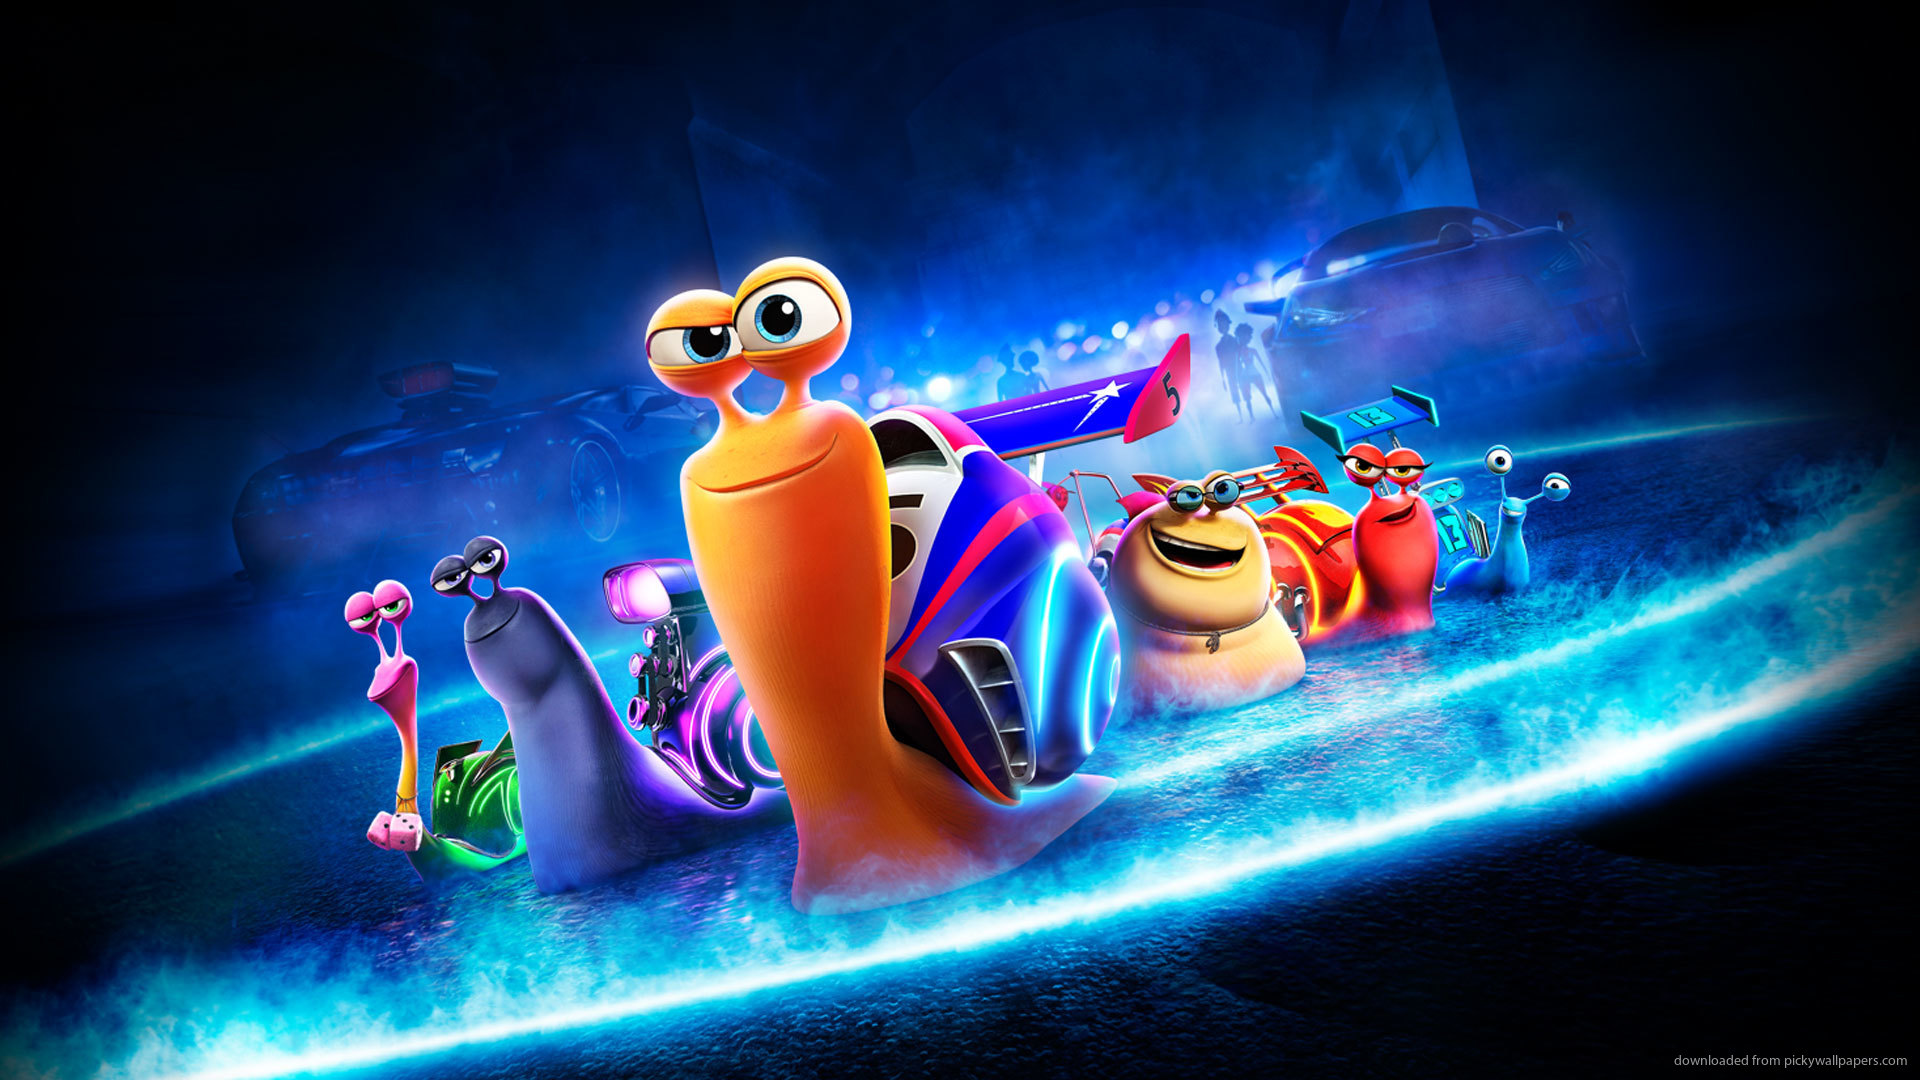 Dreamworks Turbo Movie Wallpaper Picture For iPhone Blackberry iPad